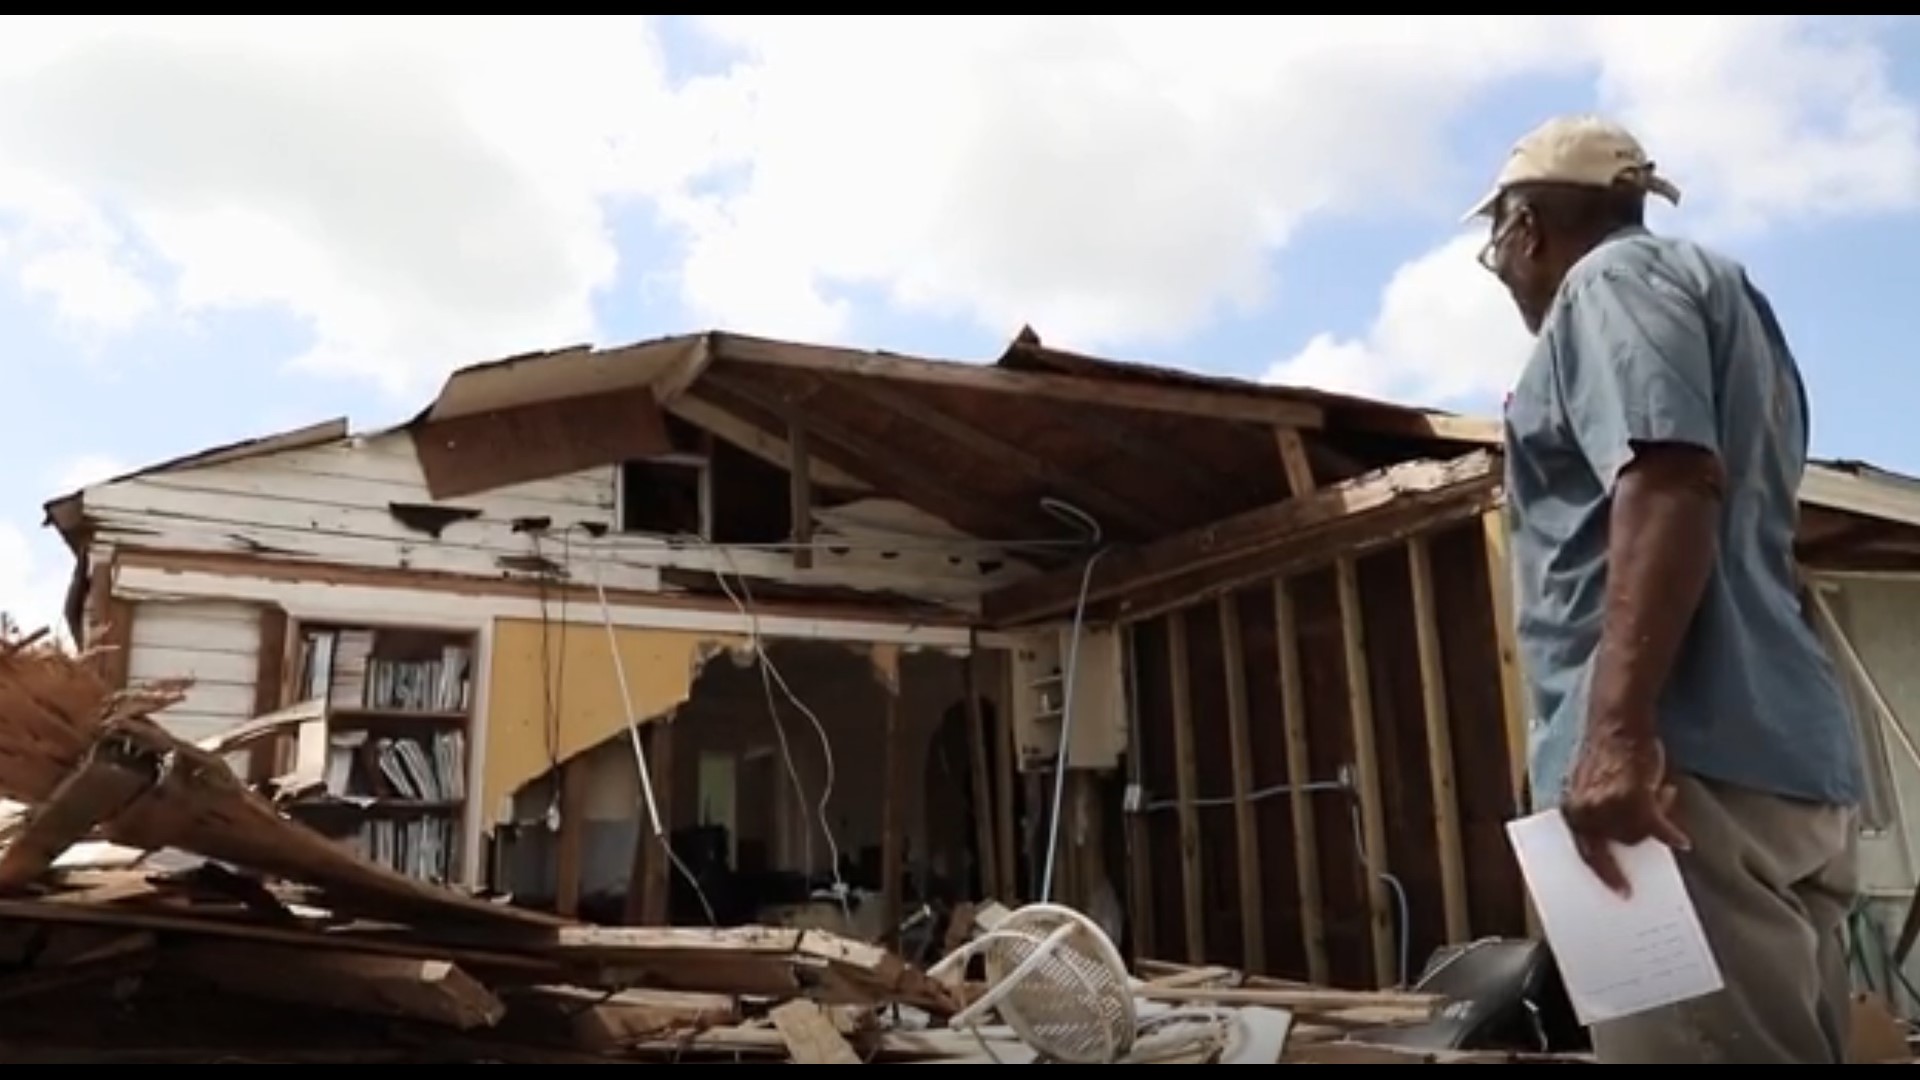 On Grand Bahama Island, The Reverend Lawrence Laing lost his home, his church, and five immediate family members. (Video: Mackenzie Behm/Fresh Take Florida).